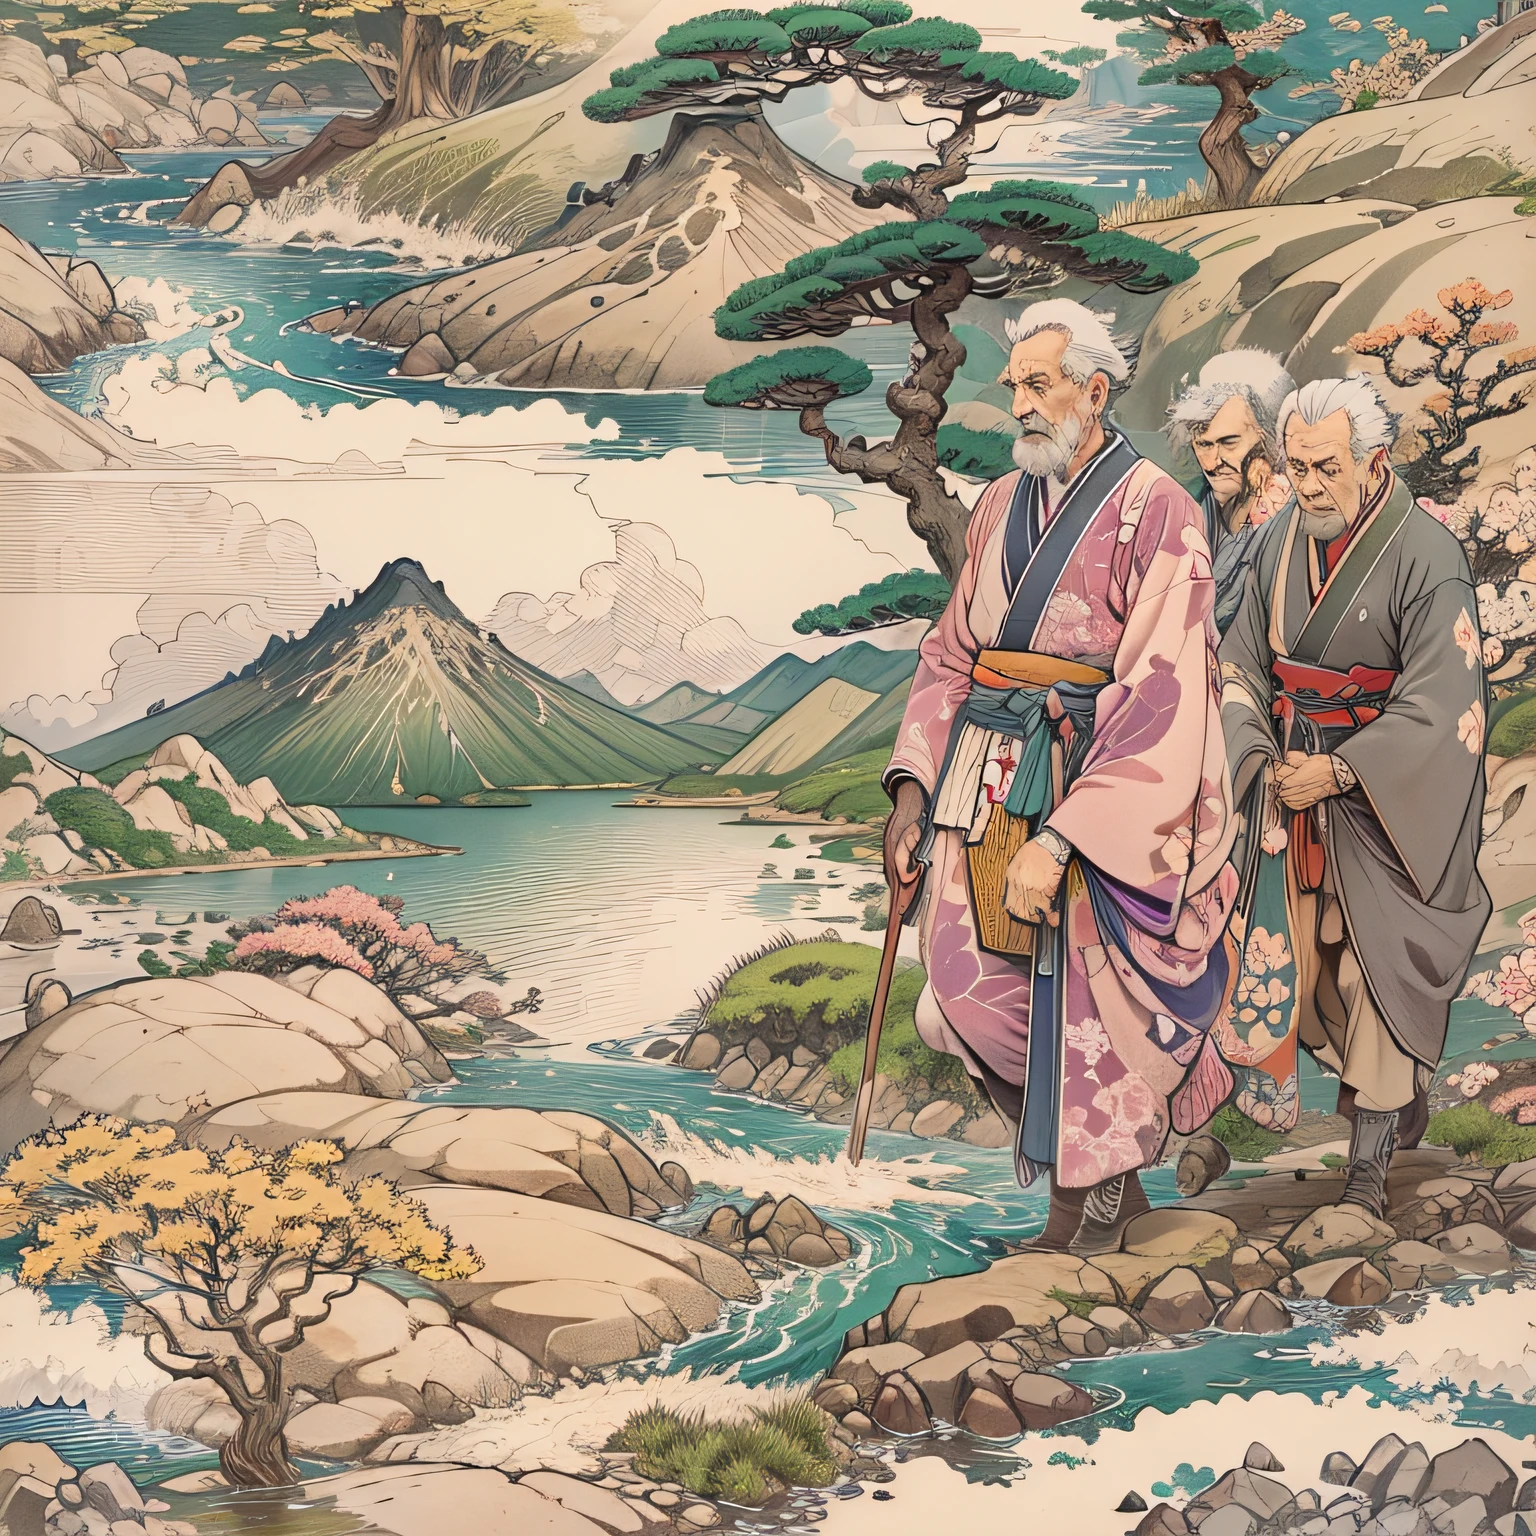 It is a full-body painting with natural colors with Katsushika Hokusai-style line drawings.　mont, Rock, flower, tussock, River, tree, mountain in the distance, (Three Old Men), (walking farmer), vanishing point, 35 mm, nffsw, masutepiece, ccurate, high detailing, Award-winning, Best Quality, 4K